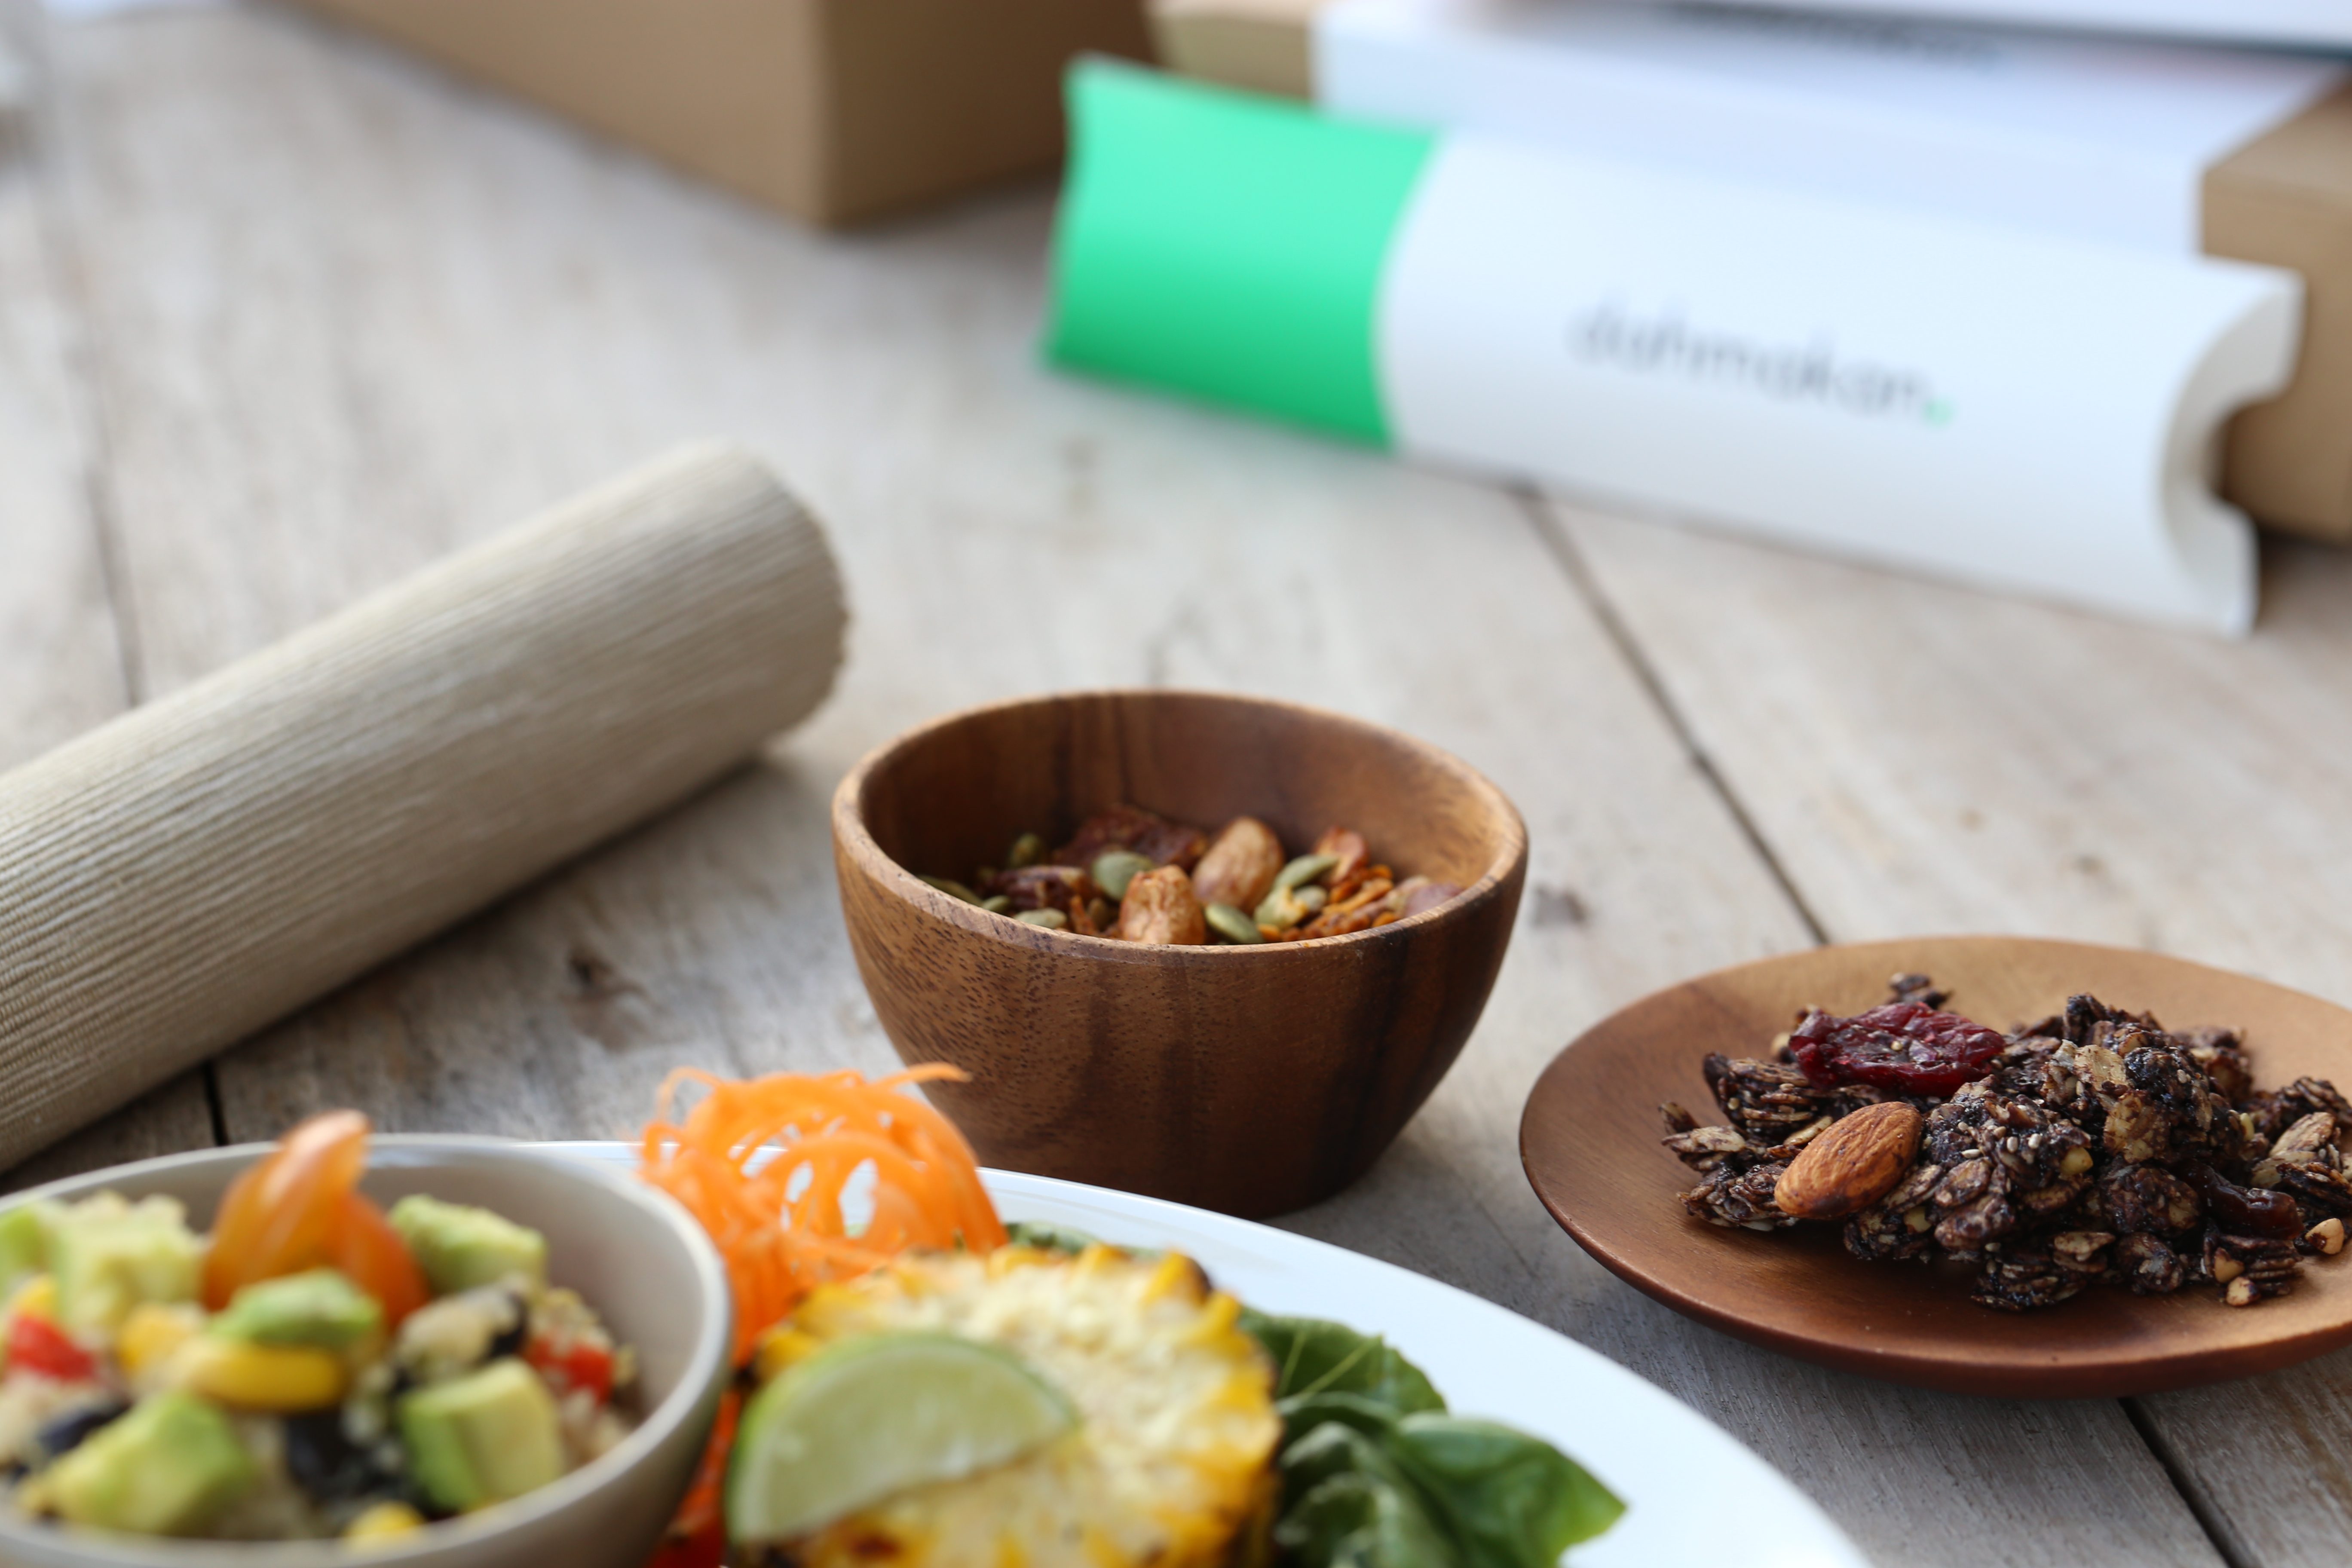 Malaysia food delivery startup Dah Makan in talks with global VCs for next funding round